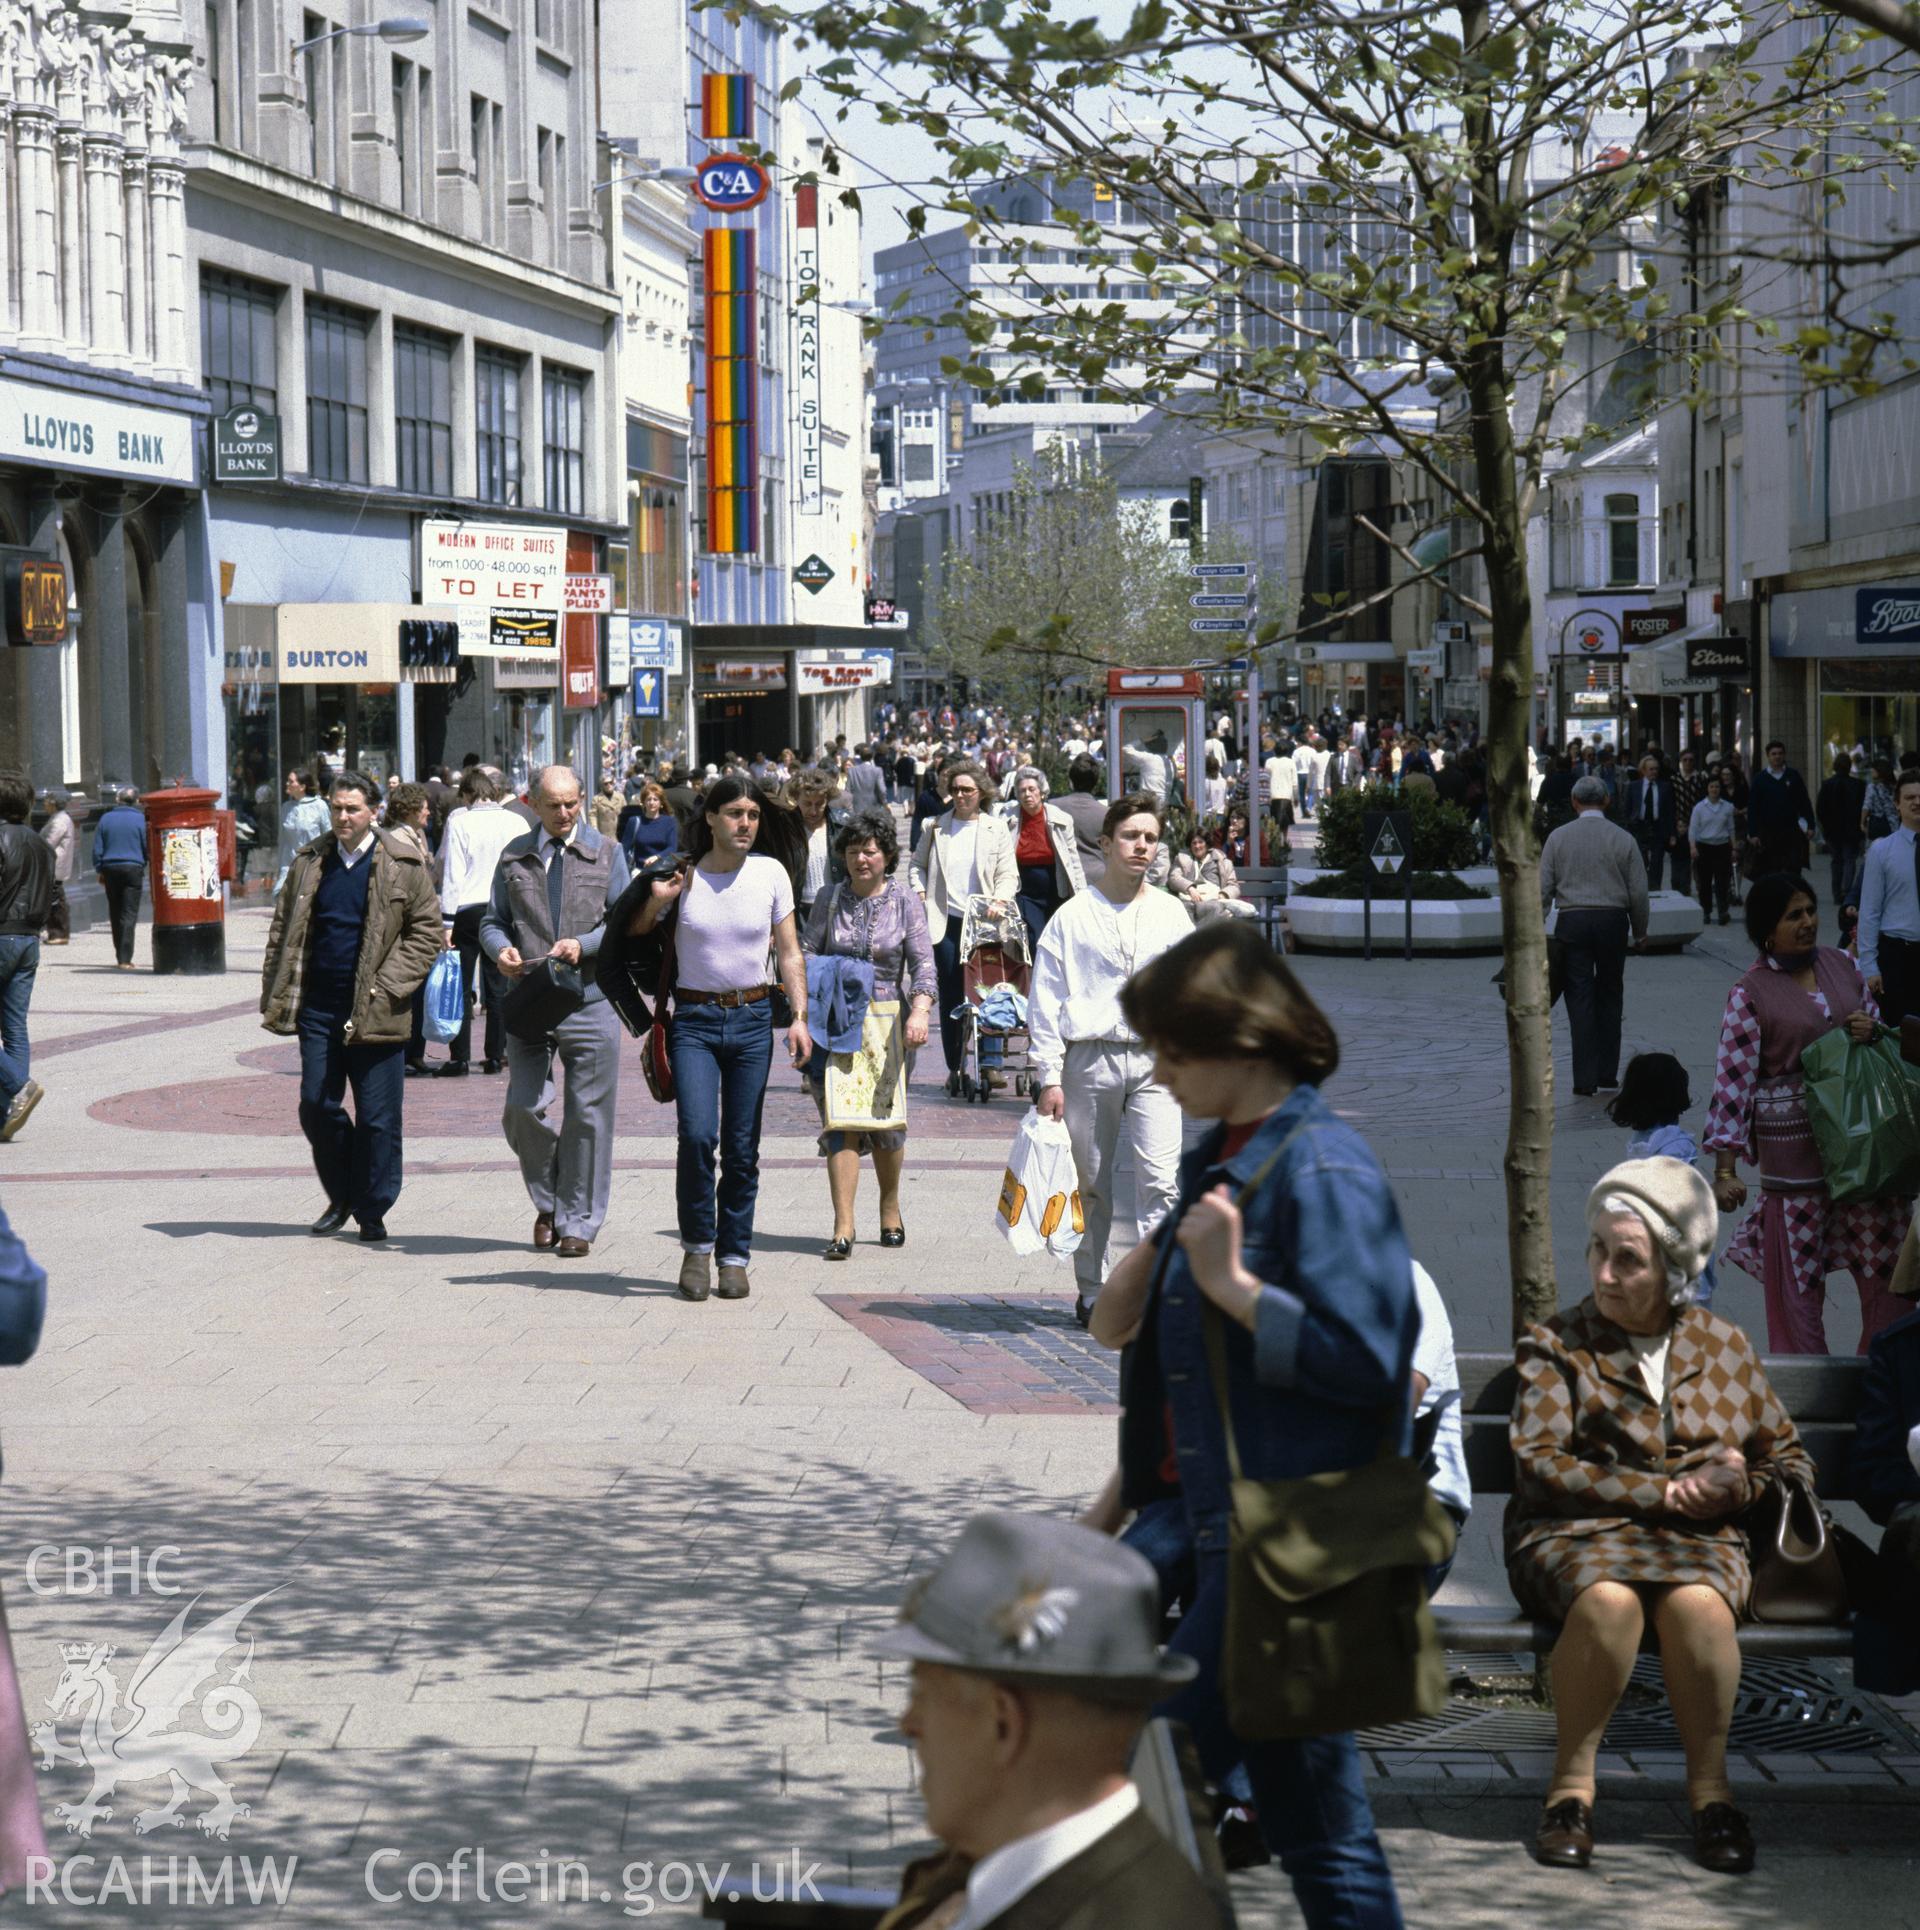 1 colour transparency showing street scene in central Cardiff with shoppers; collated by the former Central Office of Information.